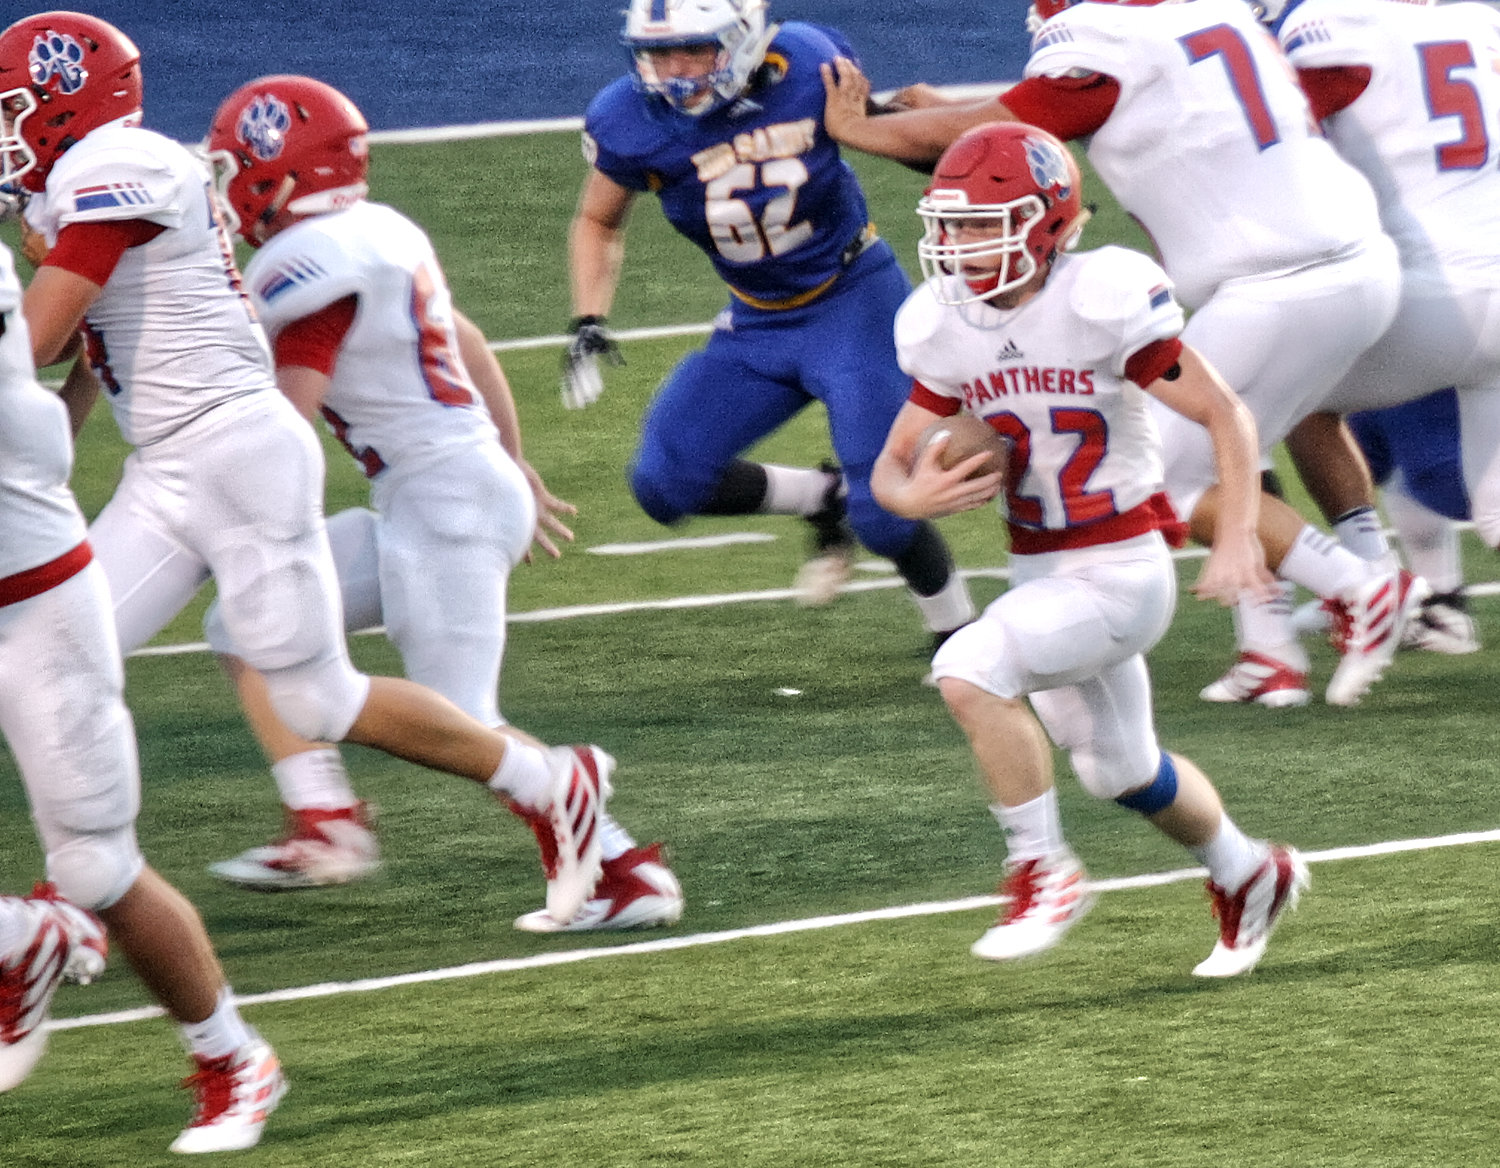 Panther Austin Hartley carries in action against Big Sandy.